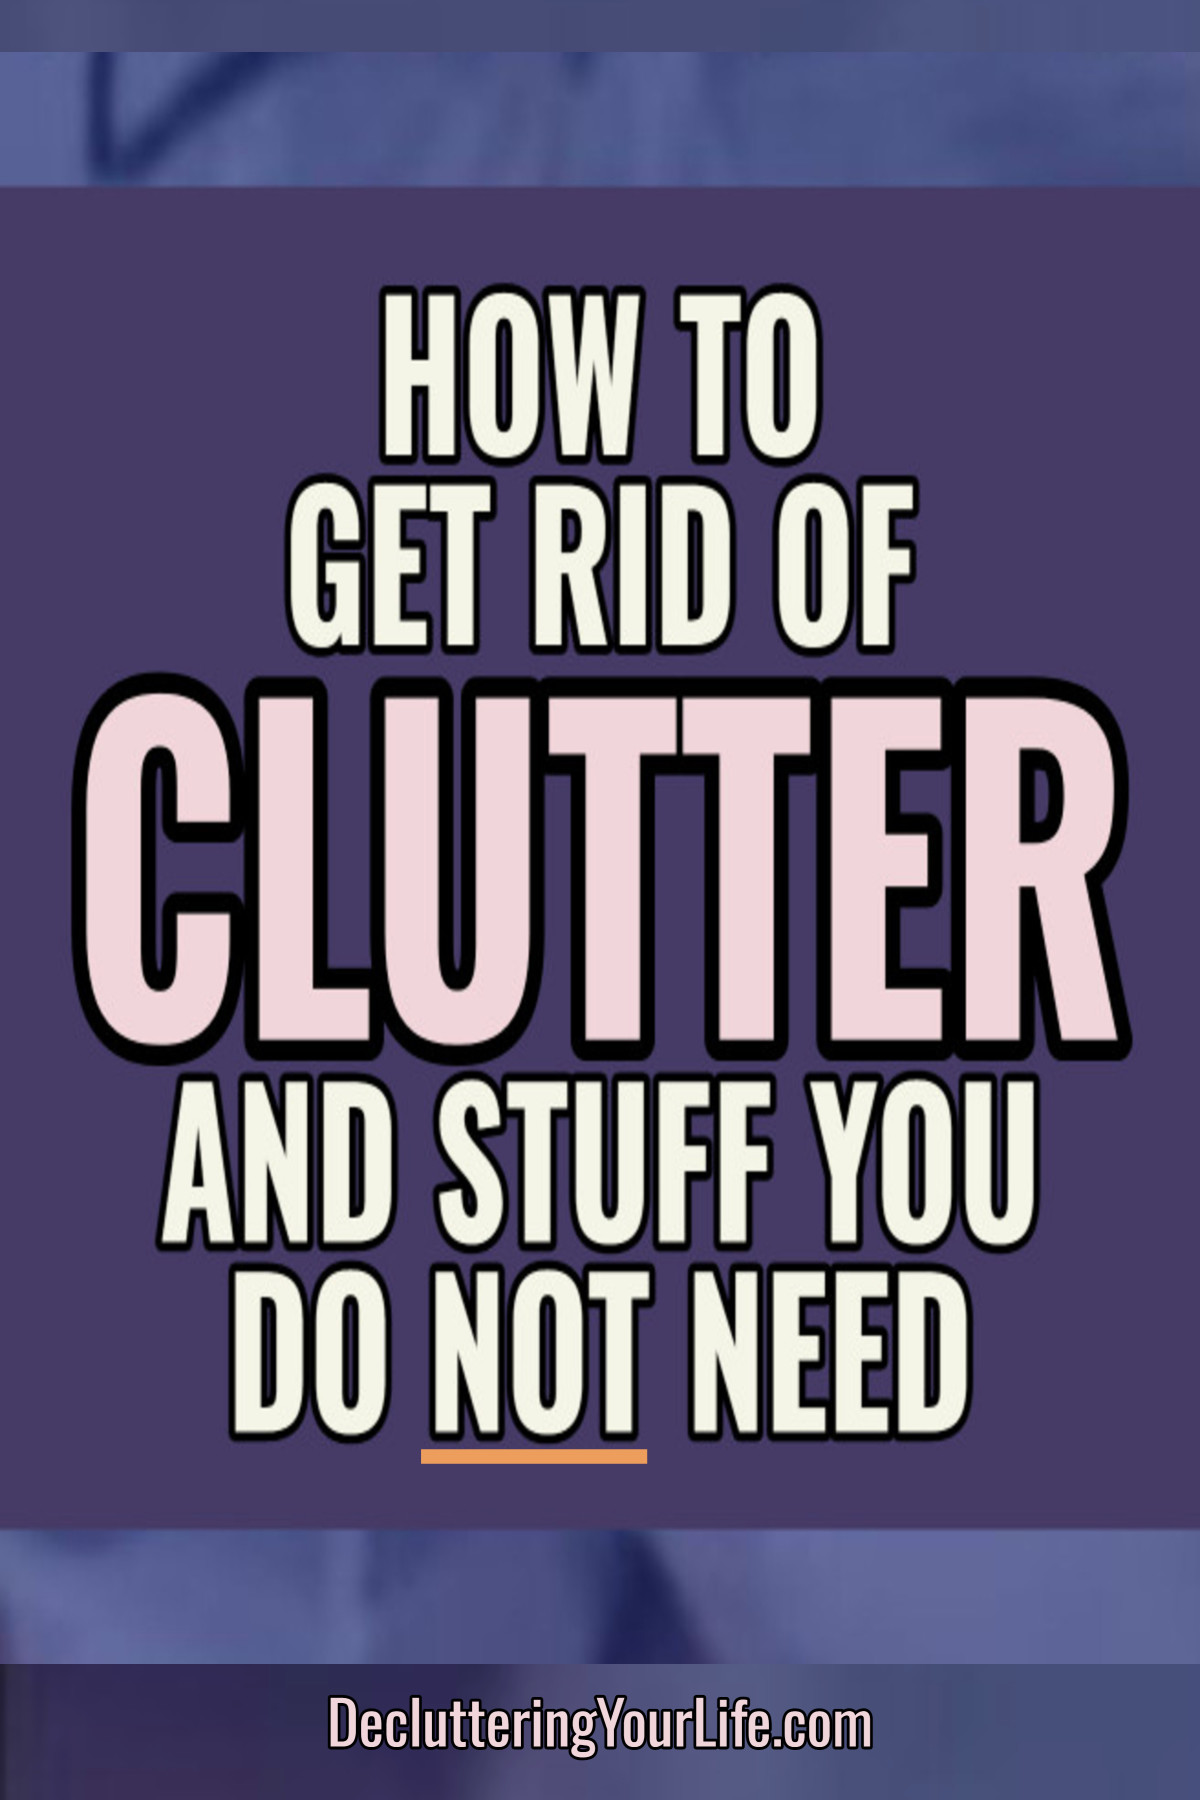 How To Get Rid Of Clutter and Stuff You Do Not Need